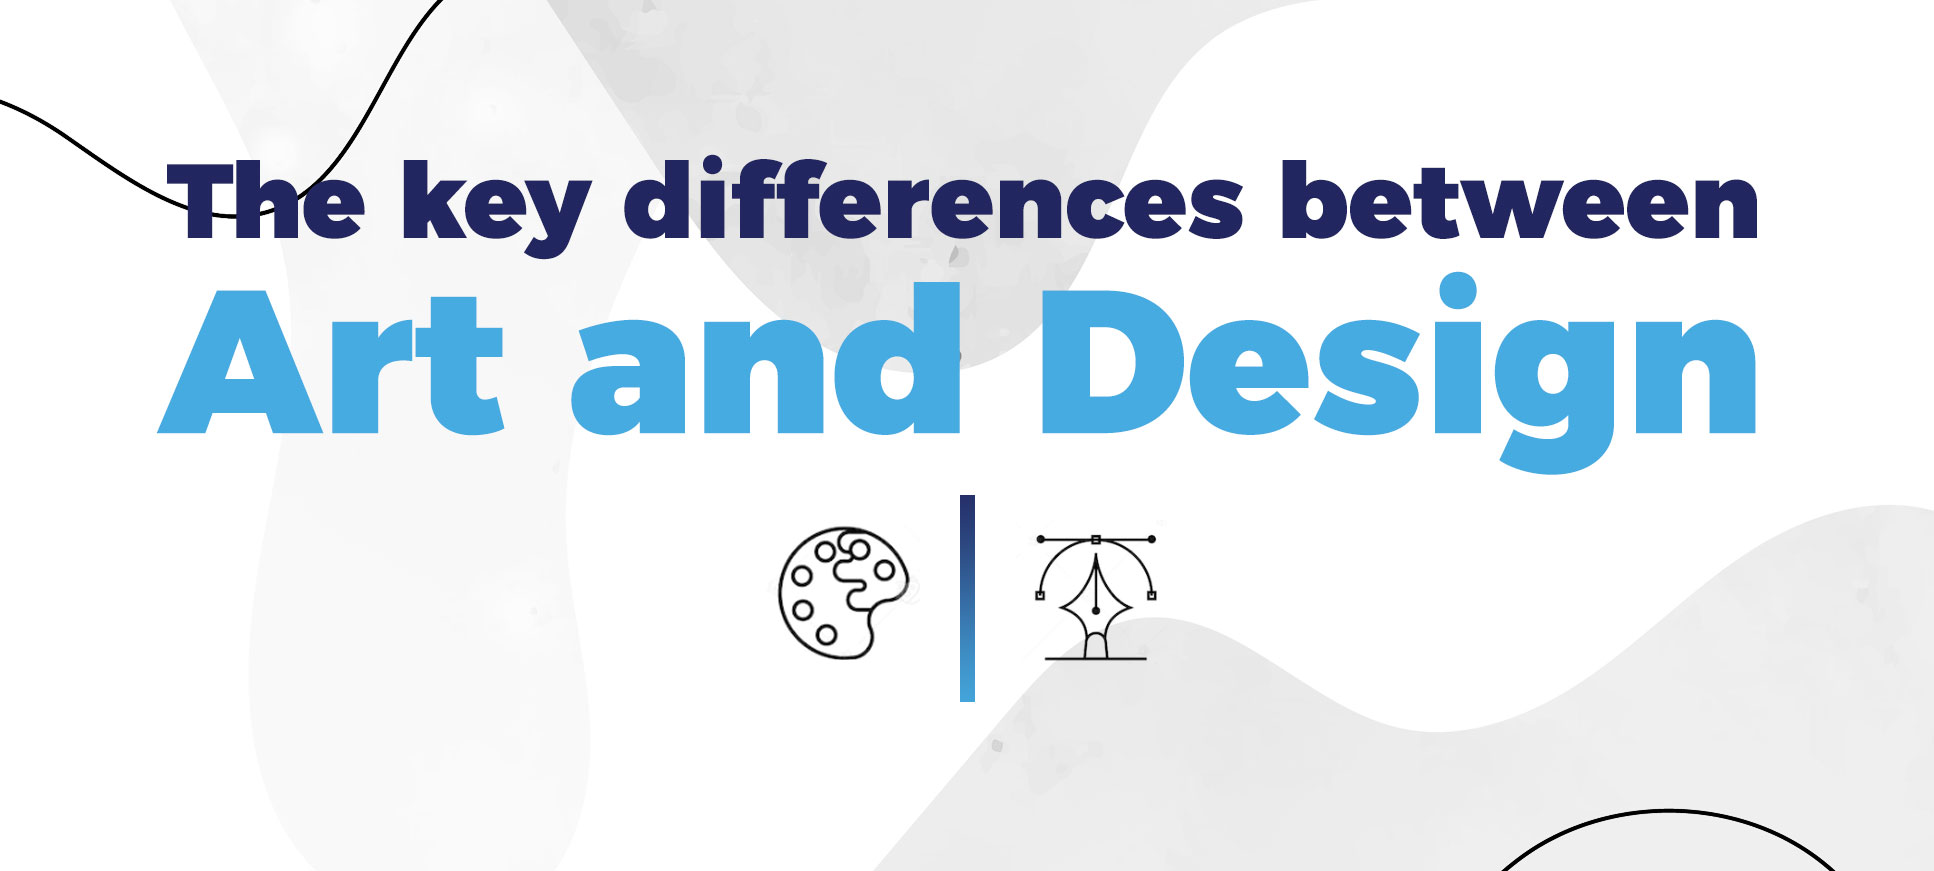 The key differences between art and design